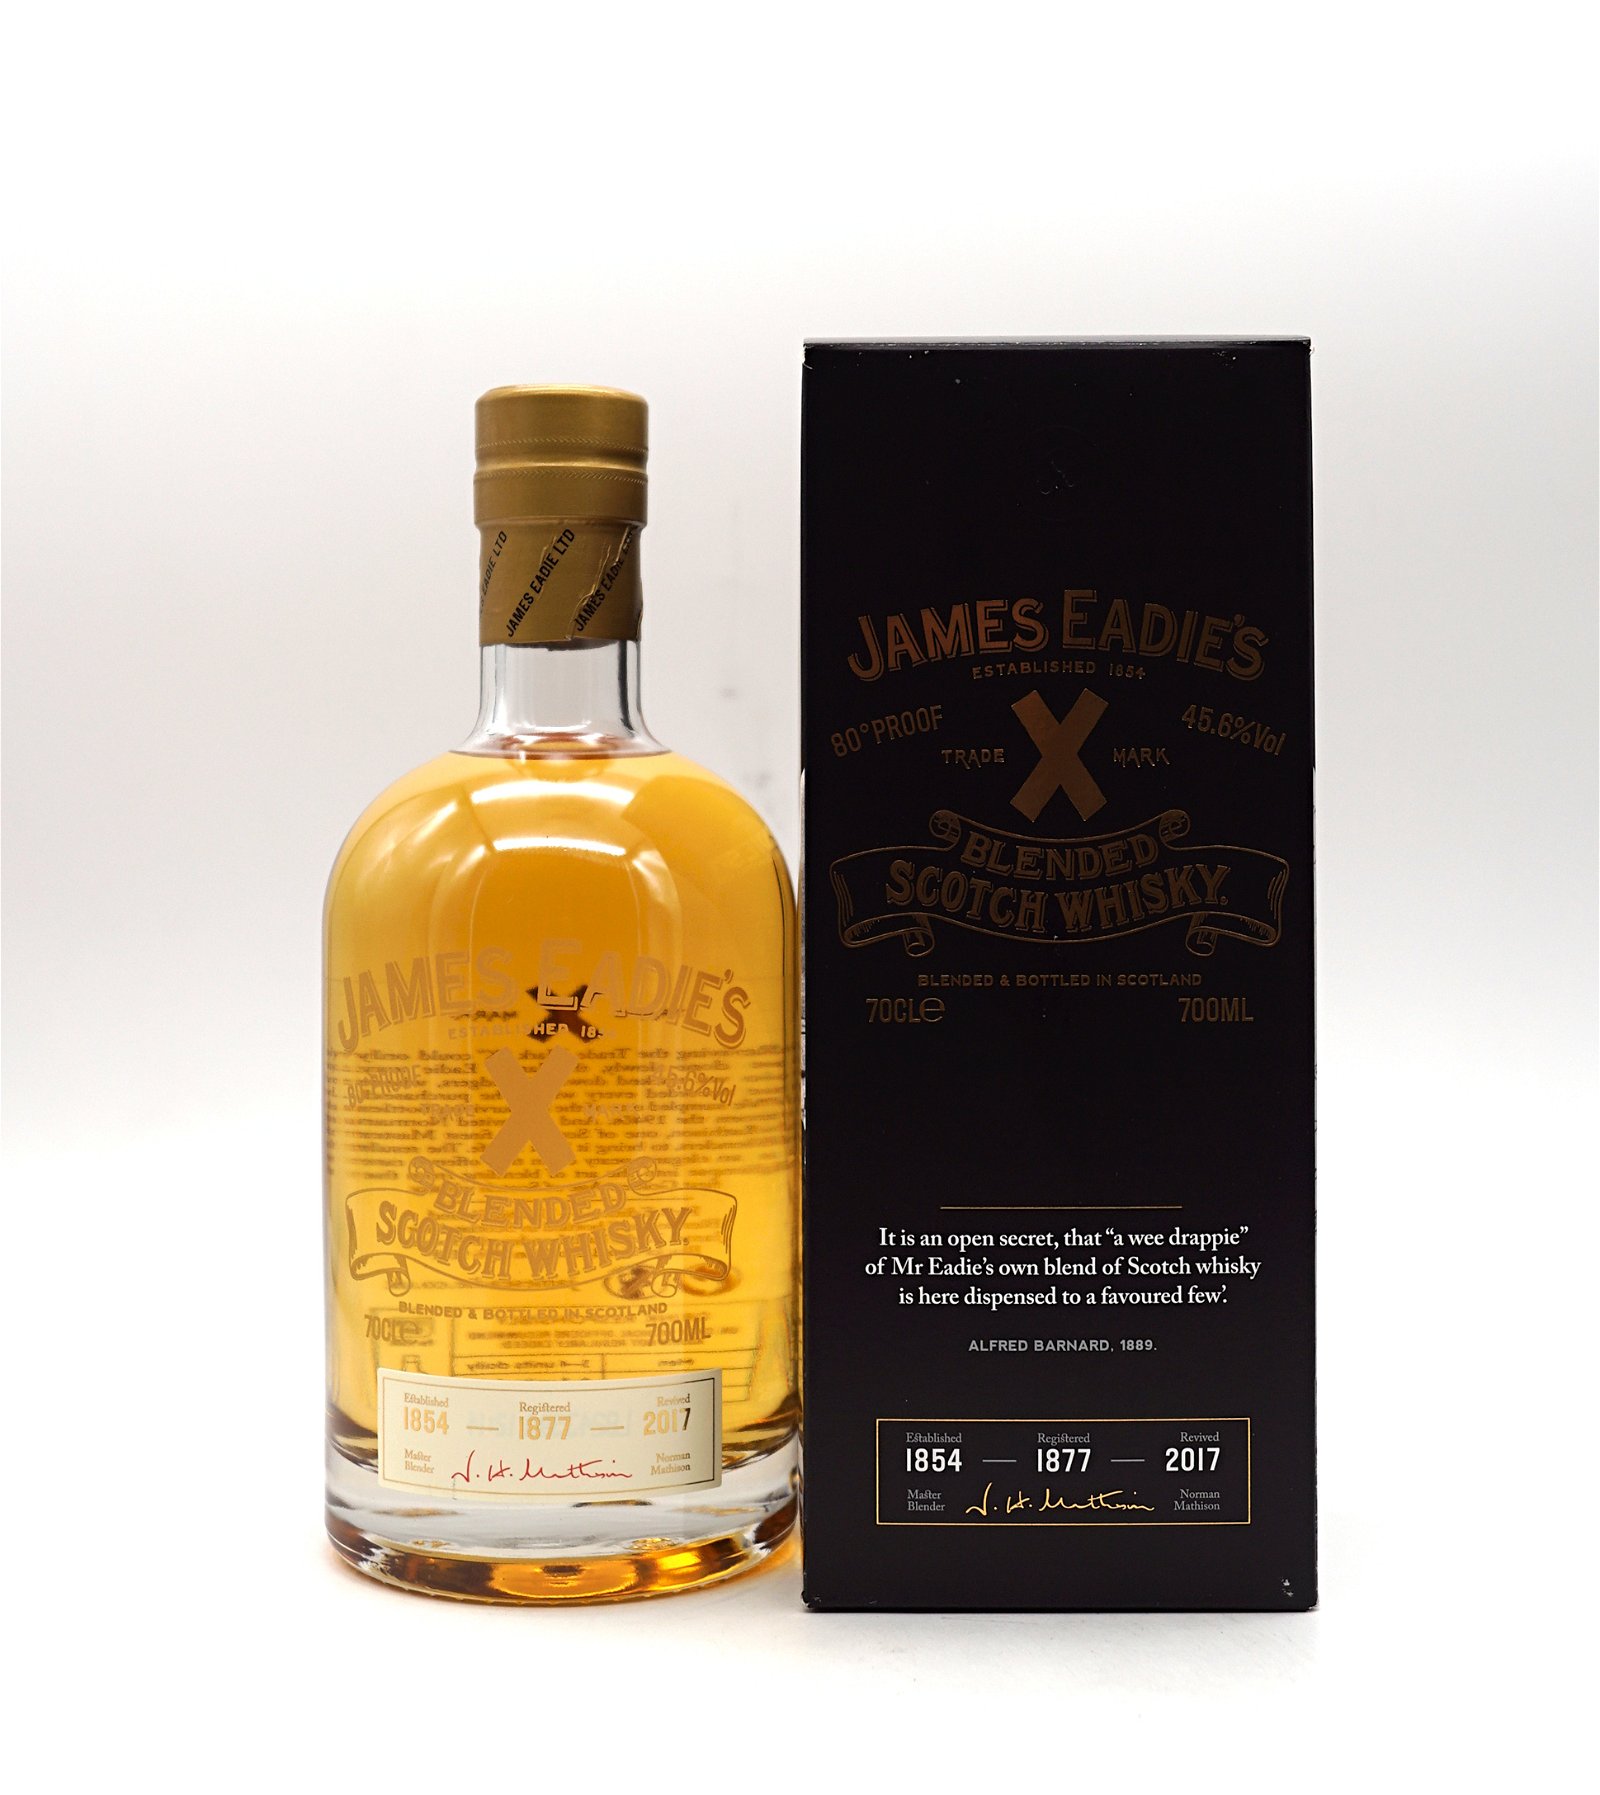 James Eadie's Trademark X Blended Scotch Whisky 